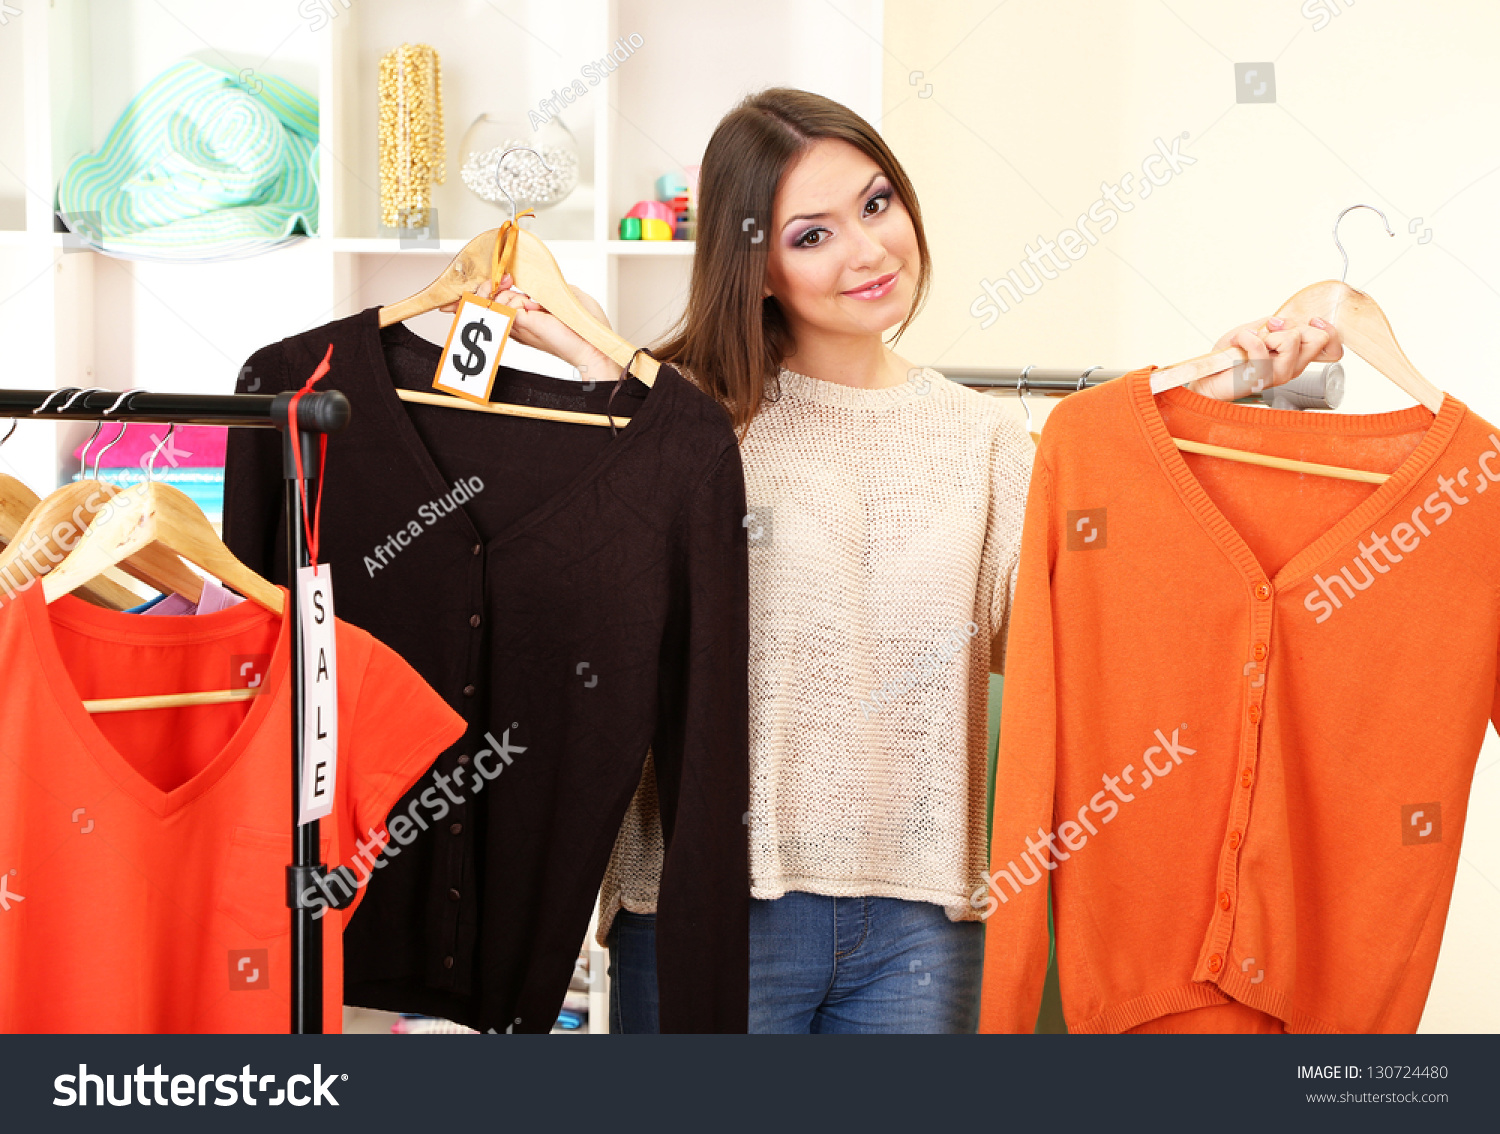 Young Girl In Shop Buying Clothes Stock Photo 130724480 : Shutterstock